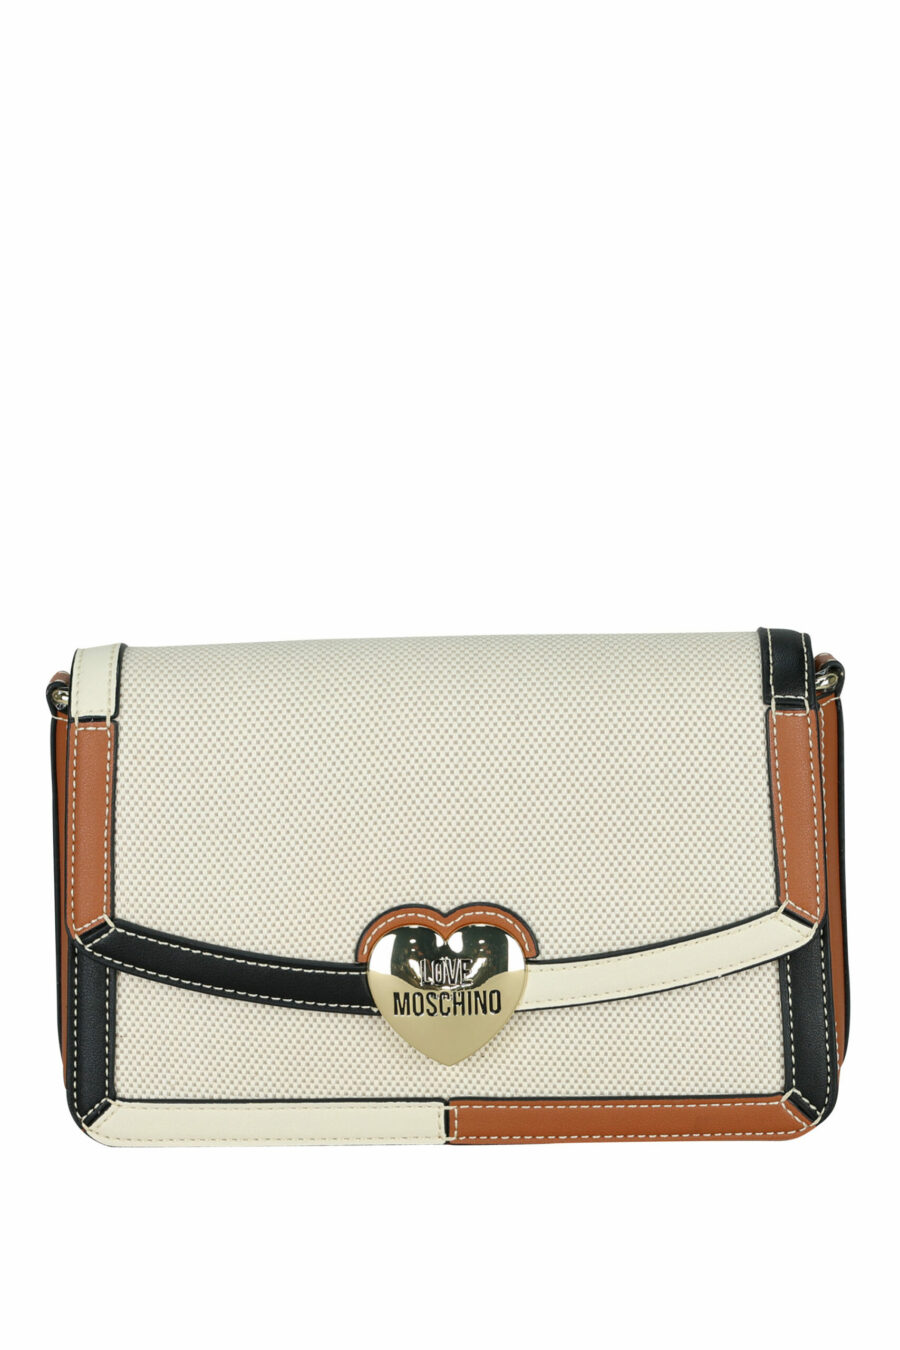 Brown and beige shoulder bag with mini pocket and gold metal heart logo - 8050537398592 scaled